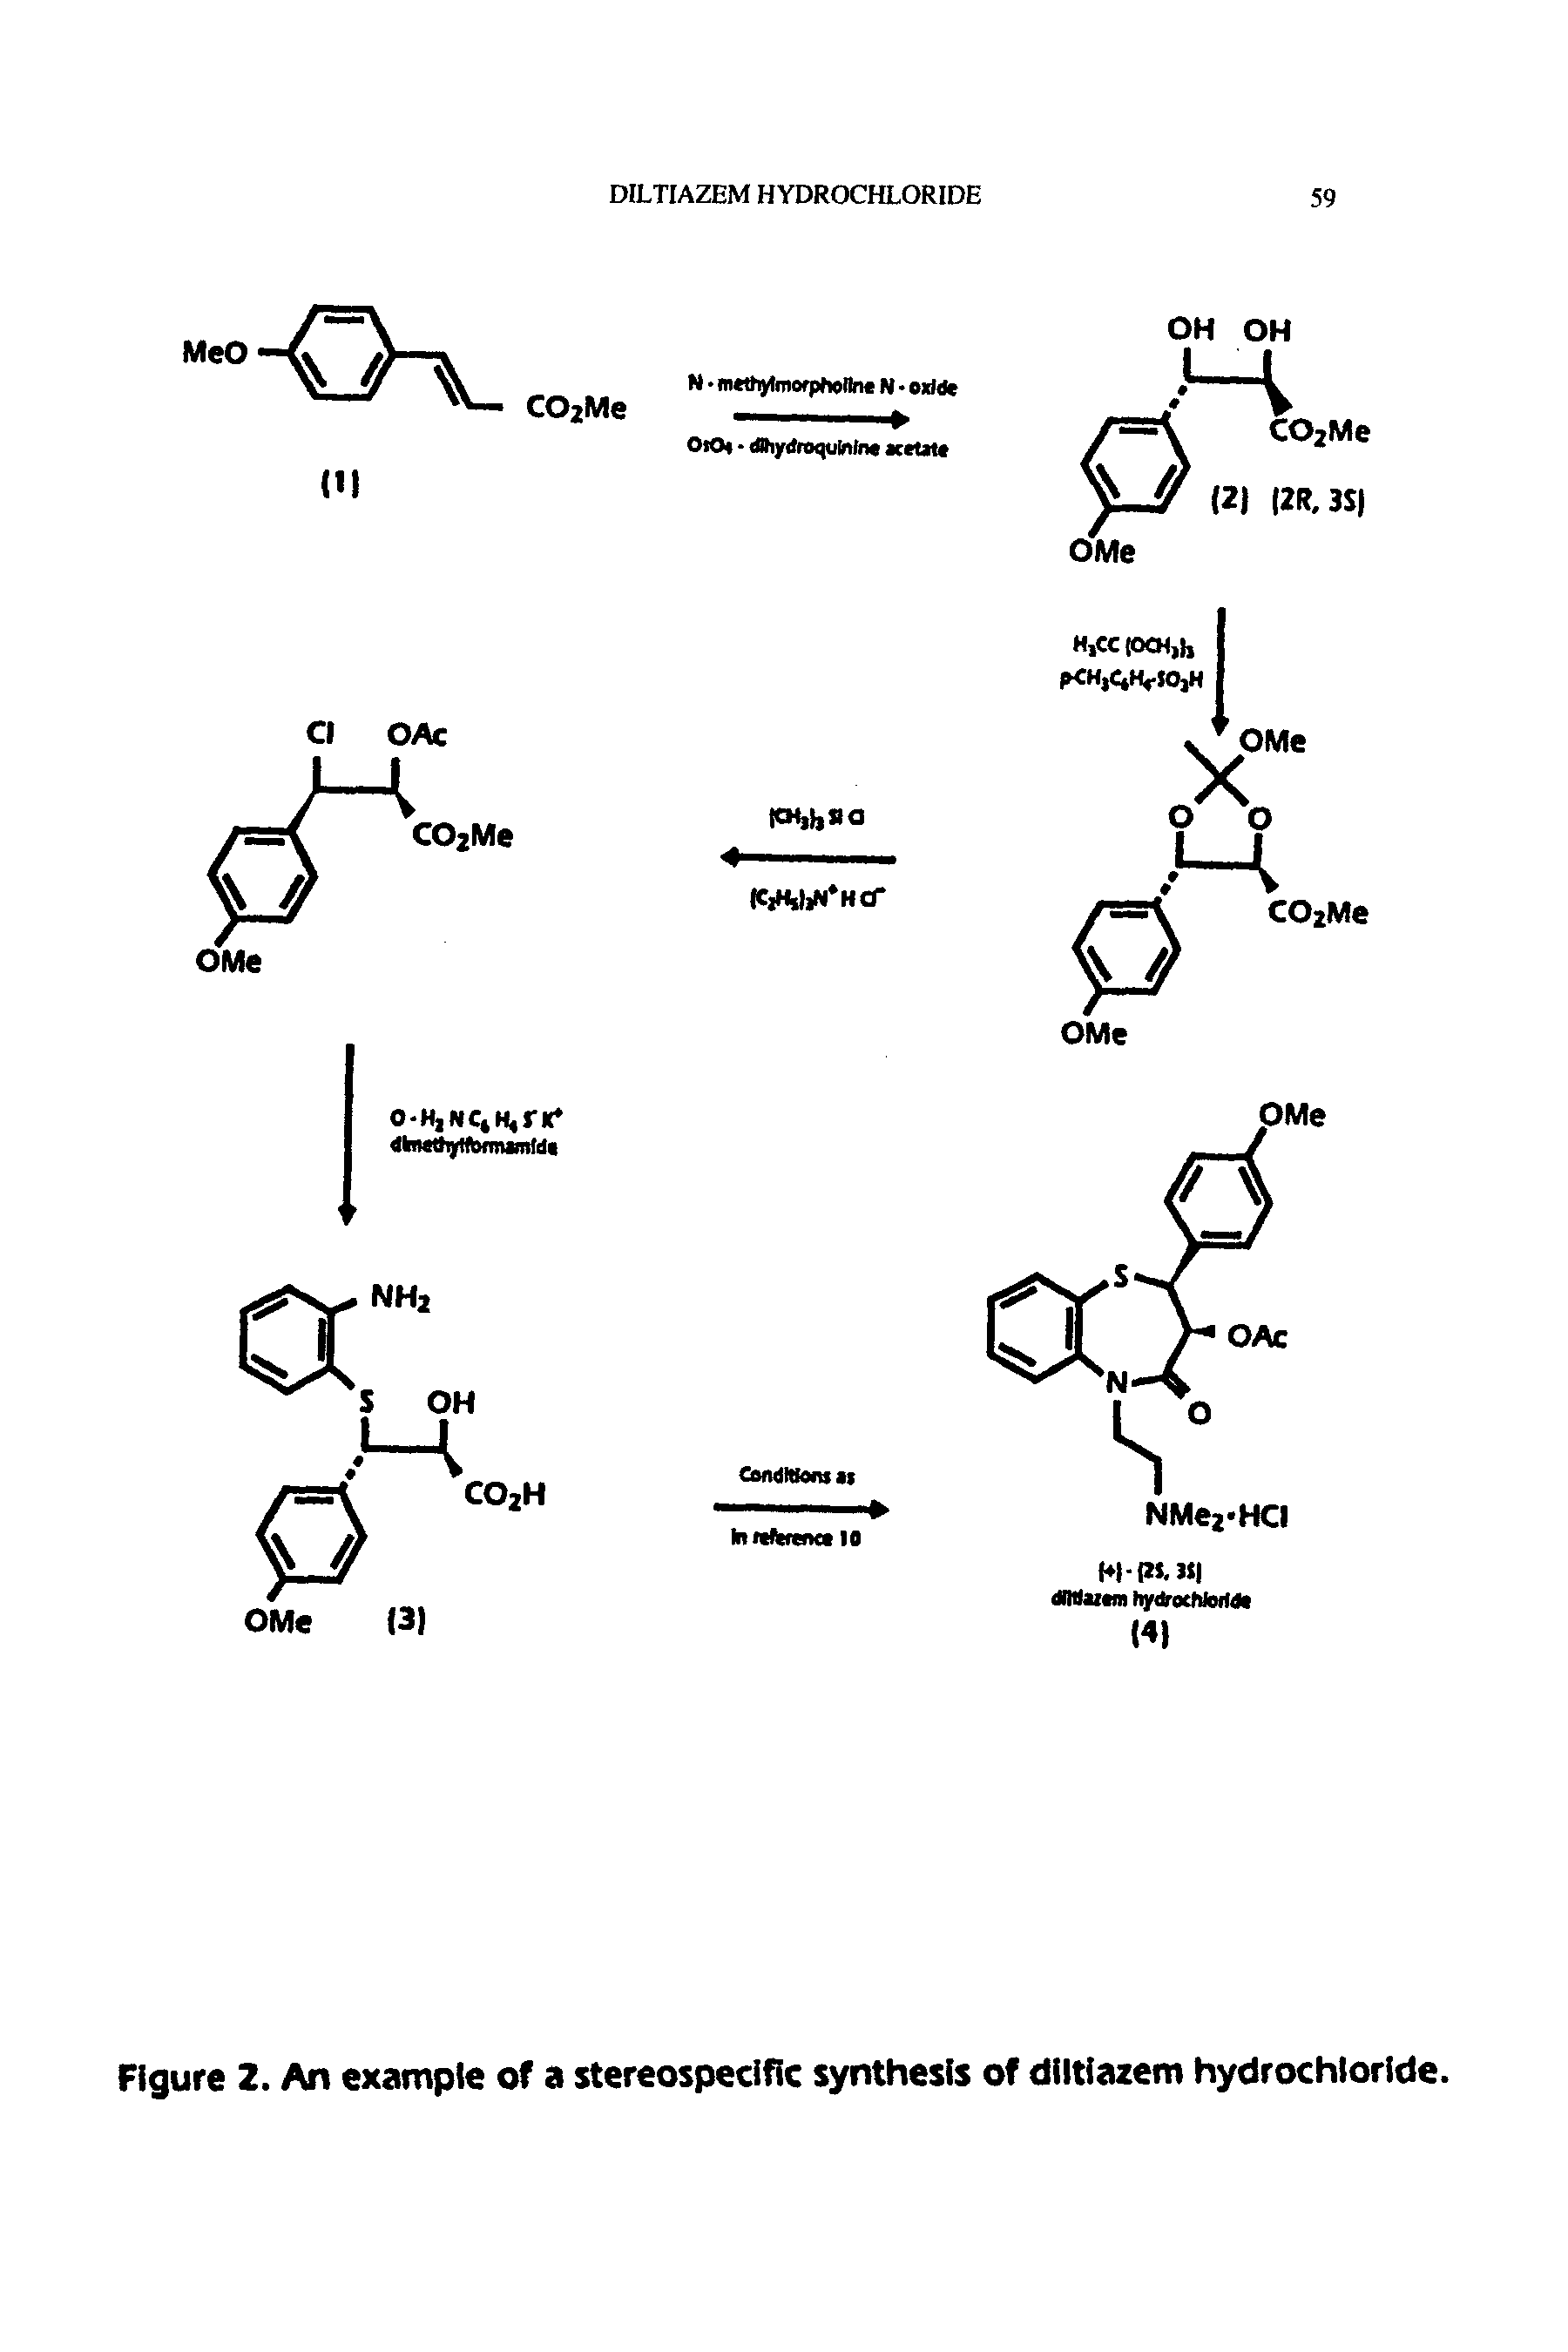 Figure 2. An example of a stereospecific synthesis of diltiazem hydrochloride.